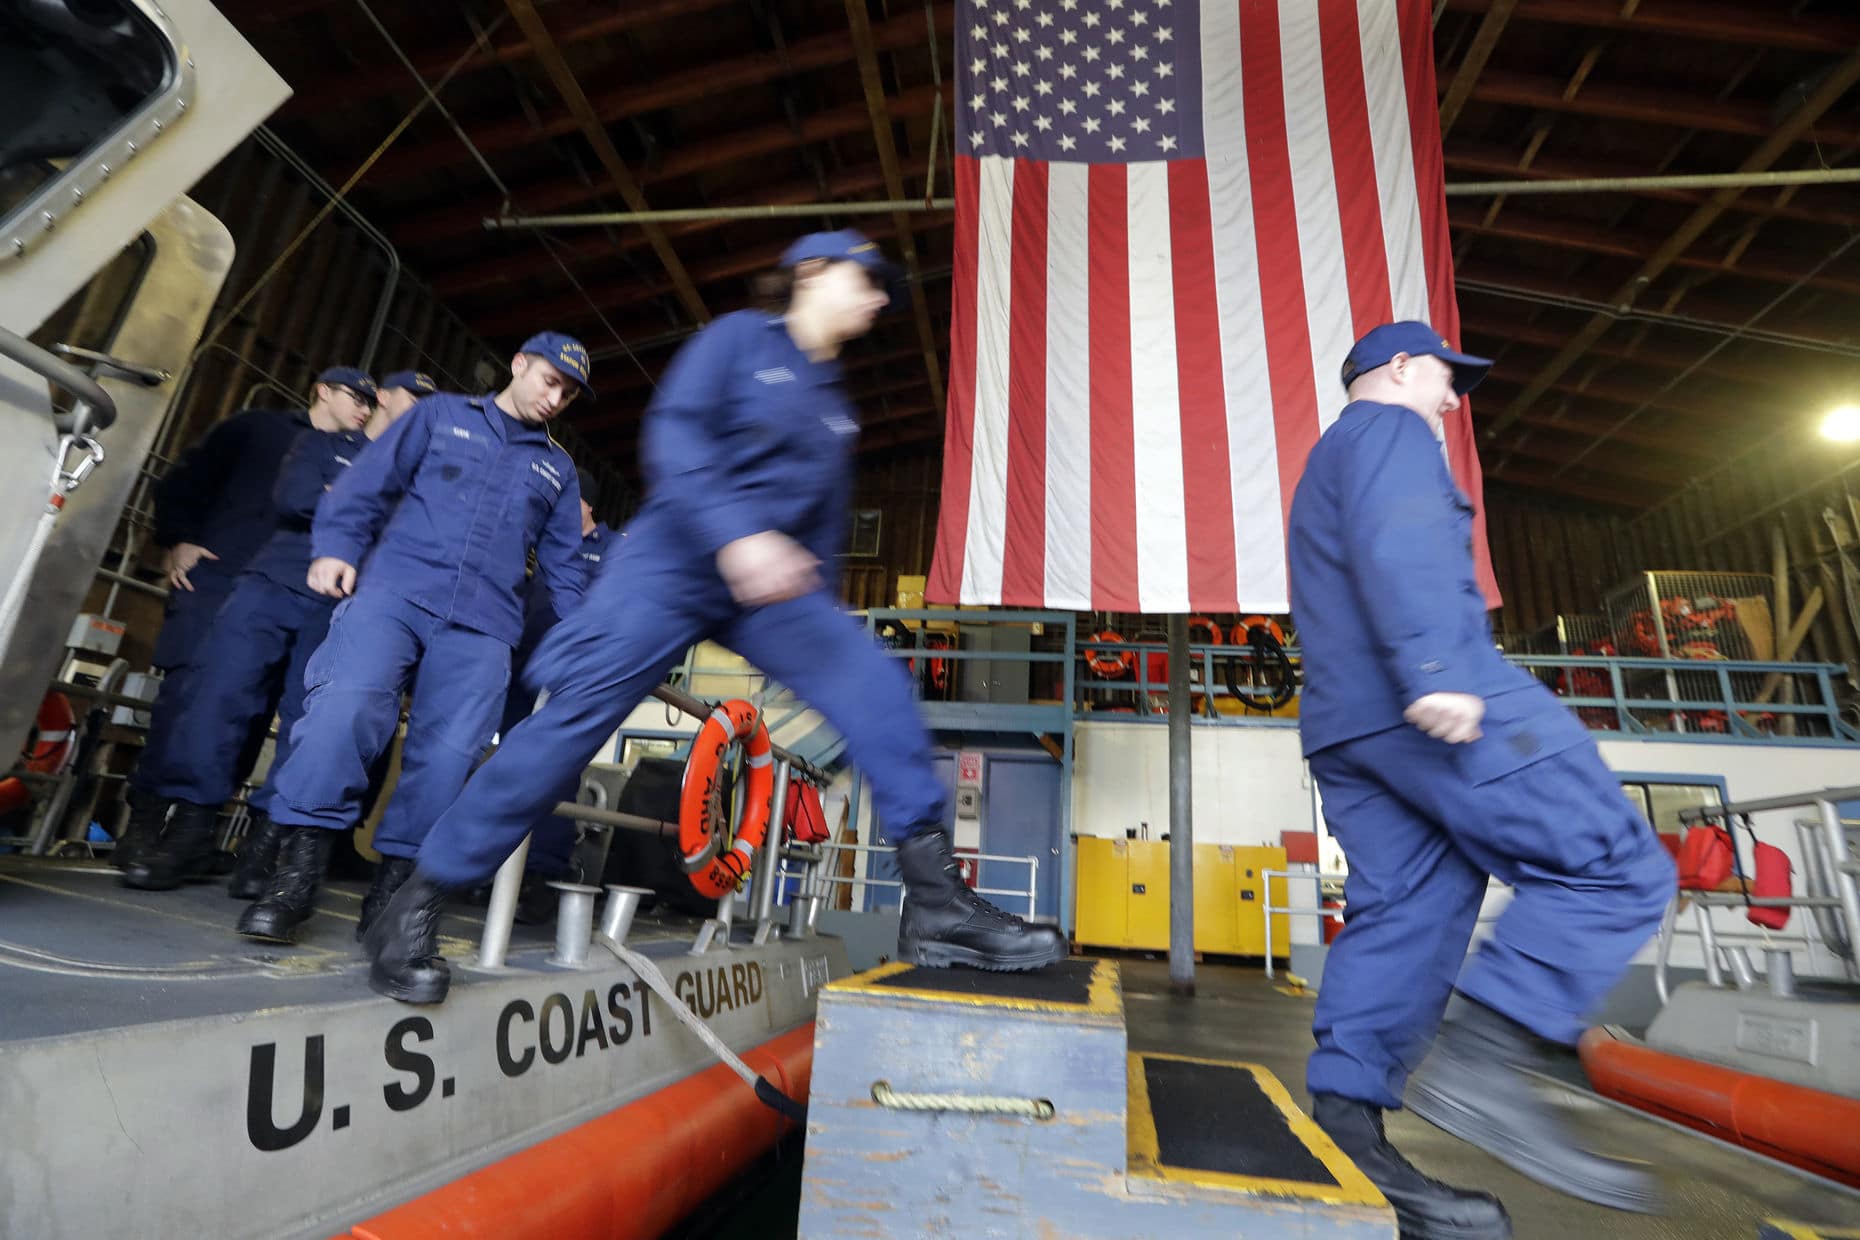 FILE In this Wednesday, Jan 16, 2019, file photo, U.S. Coast Guardsmen and women, who missed their first paycheck a day earlier during the partial government shutdown, walk off a 45-foot response boat during their shift at Sector Puget Sound base in Seattle. San Antonio-based USAA, a military personnel insurer and financial services company, said Wednesday they has donated $15 million for interest-free loans to Coast Guard members during the partial U.S. government shutdown. The funds will be disbursed by Coast Guard Mutual Assistance. The American Red Cross Hero Care Center will assist. (AP Photo/Elaine Thompson, File)